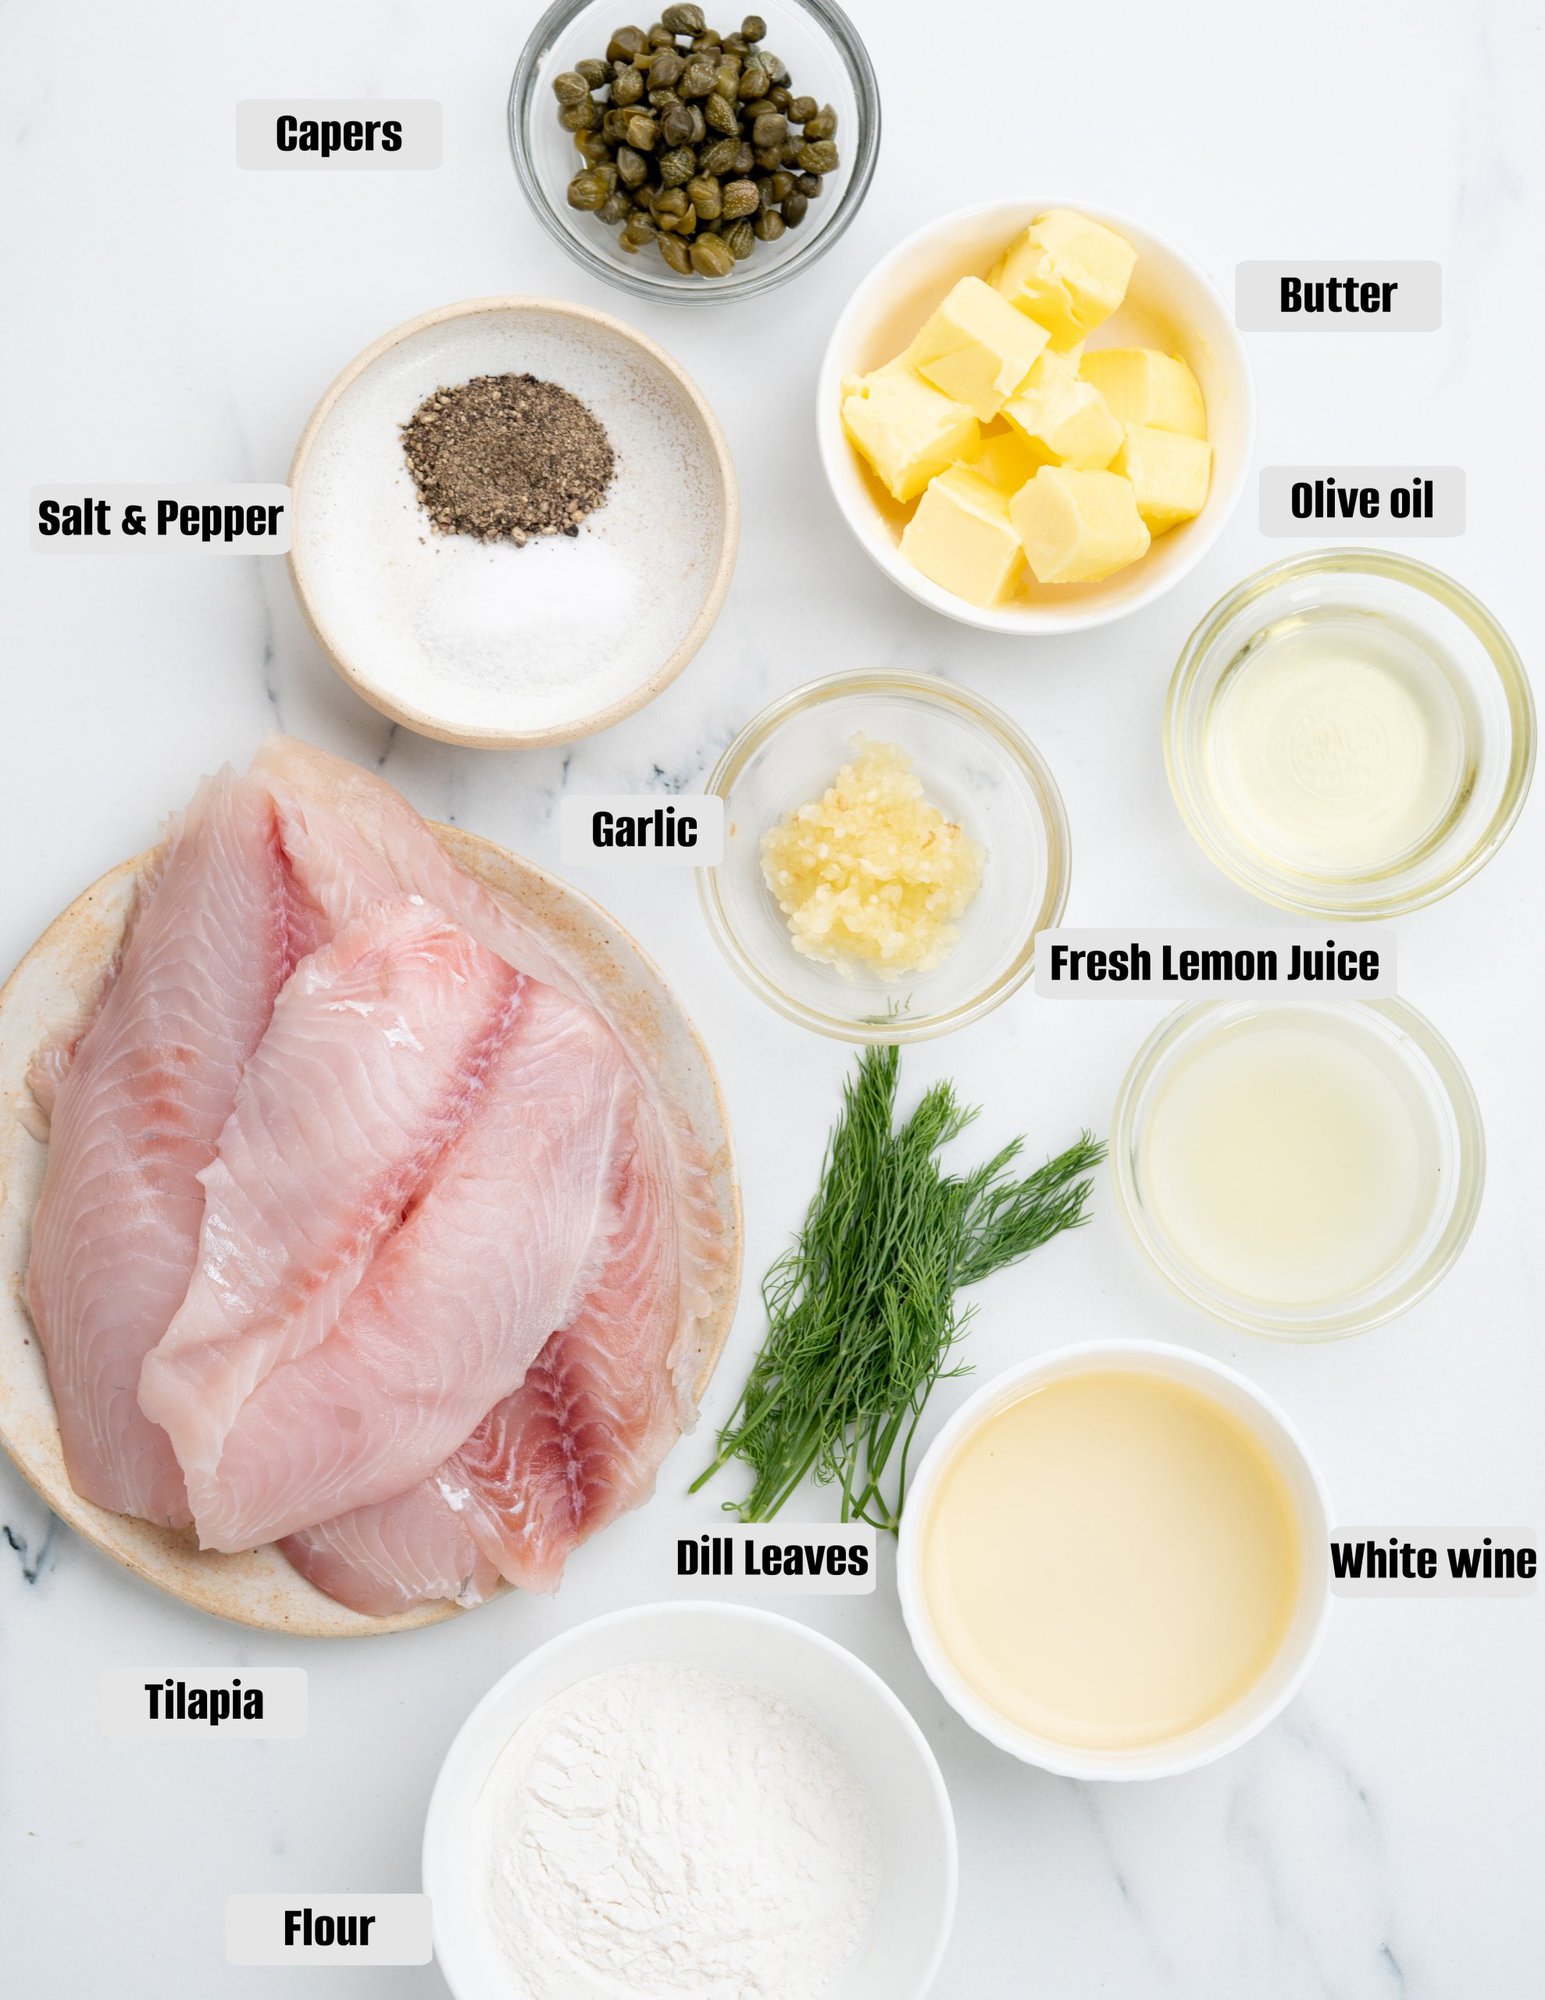 List of ingredients for the Tilapia Recipe